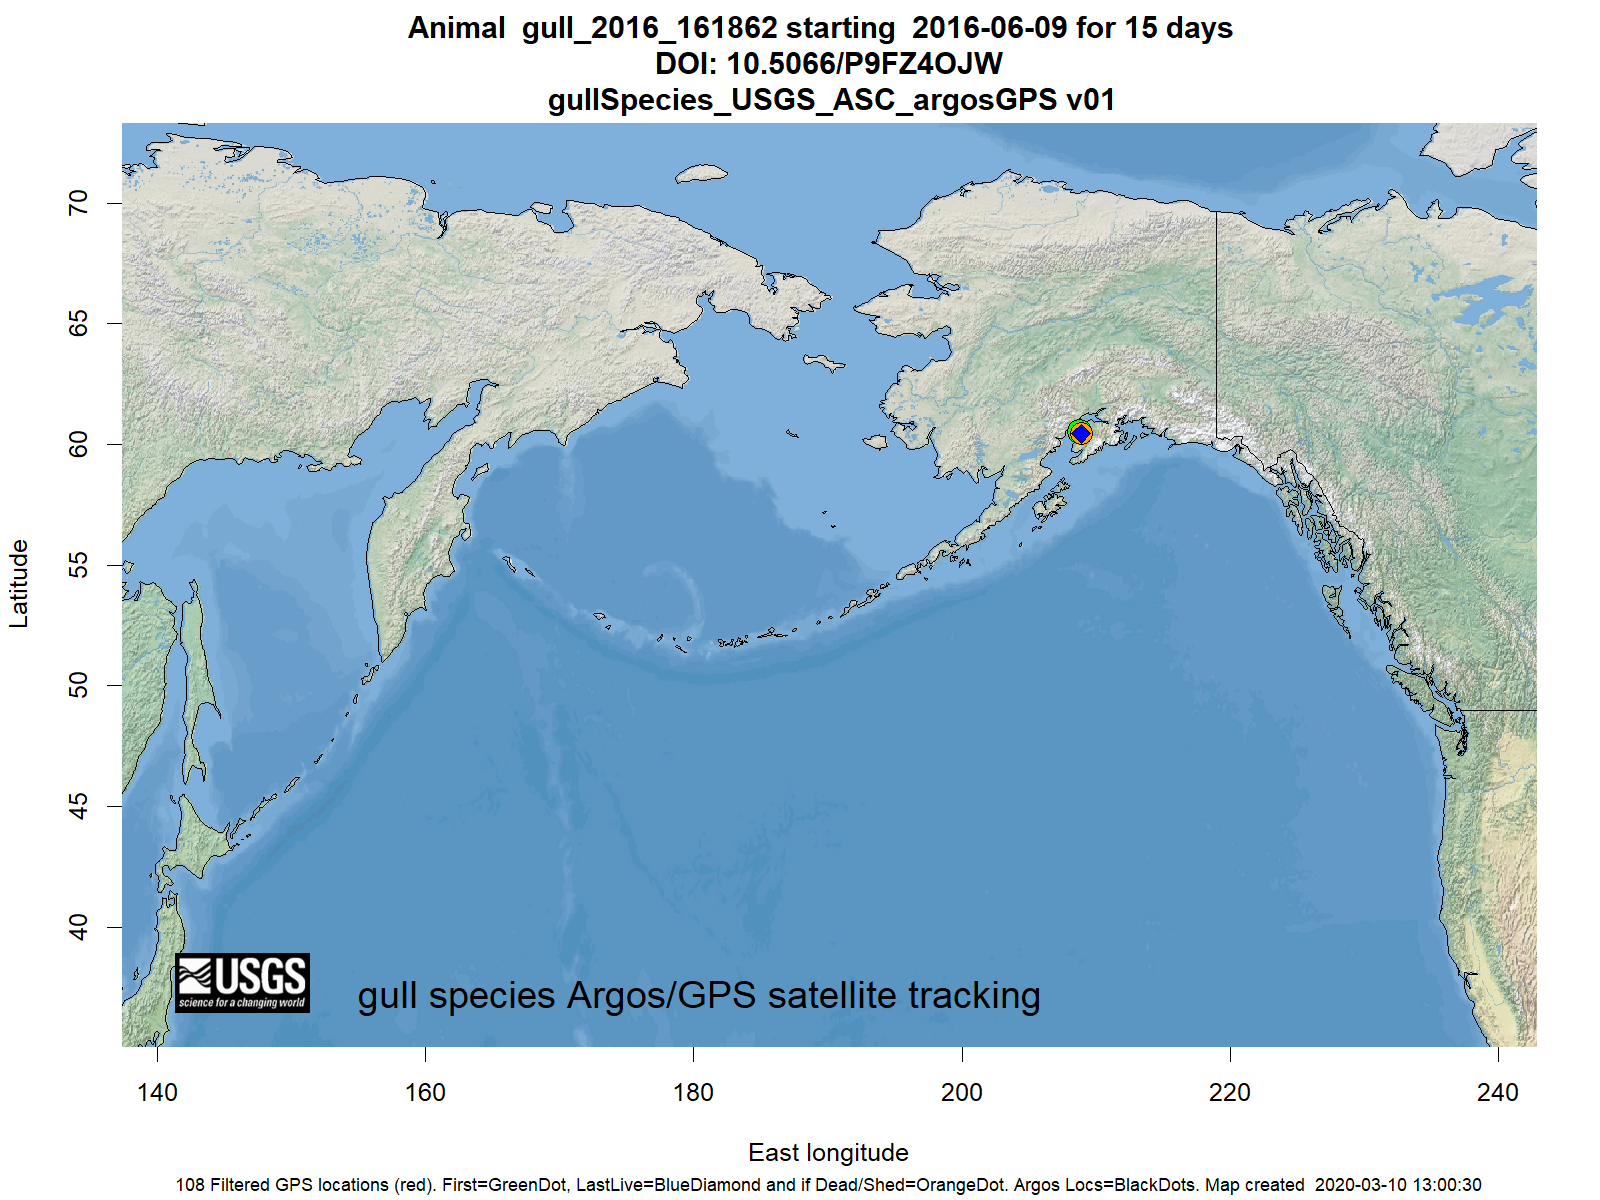 Tracking map for species gull_2016_161862